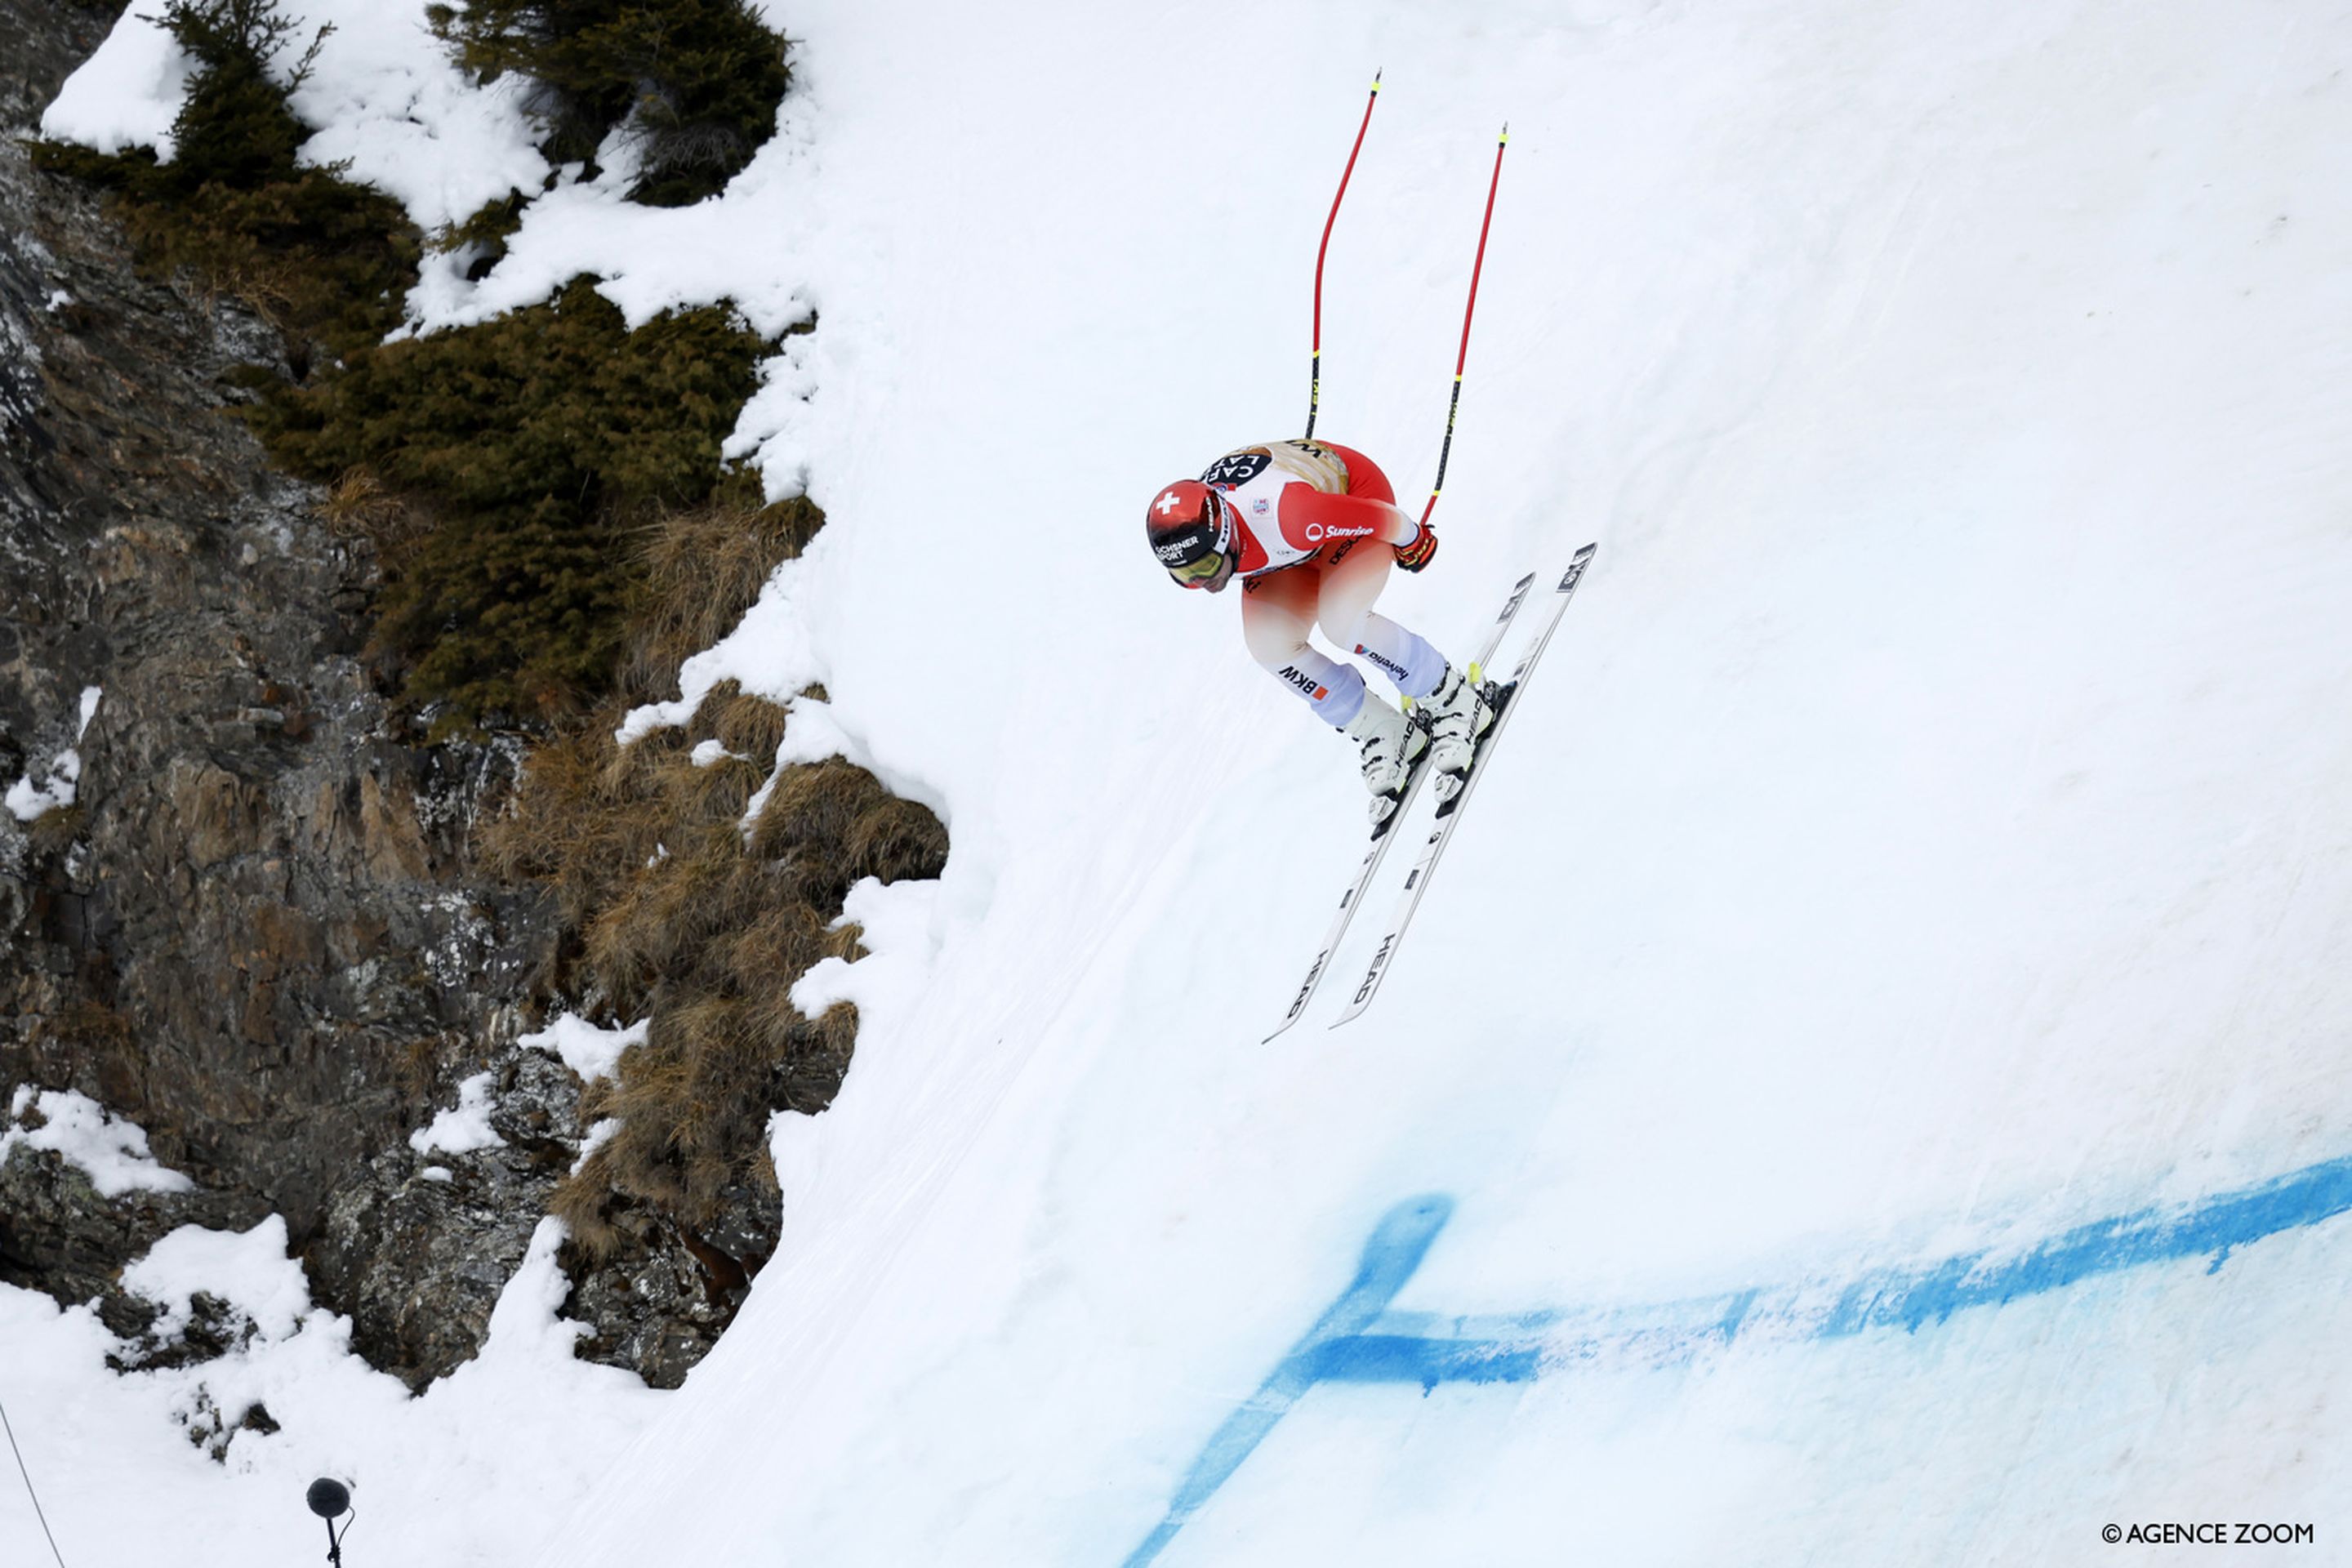 Beat Feuz (SUI) soars through the air in his final race on home soil (Agence Zoom)